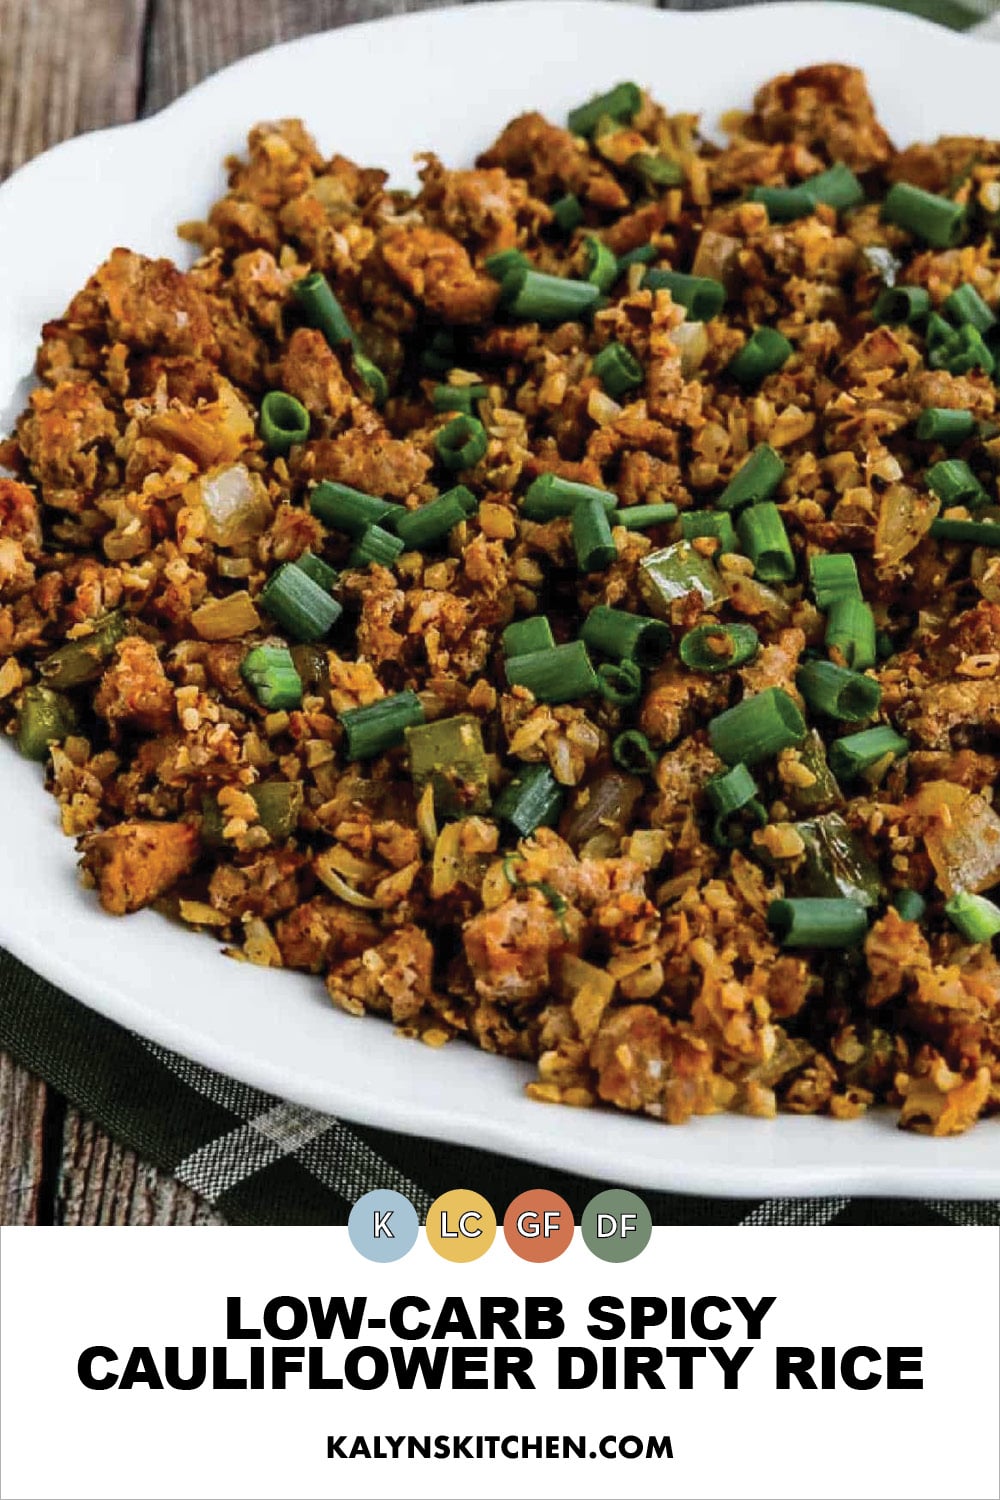 Pinterest image of Low-Carb Spicy Cauliflower Dirty Rice